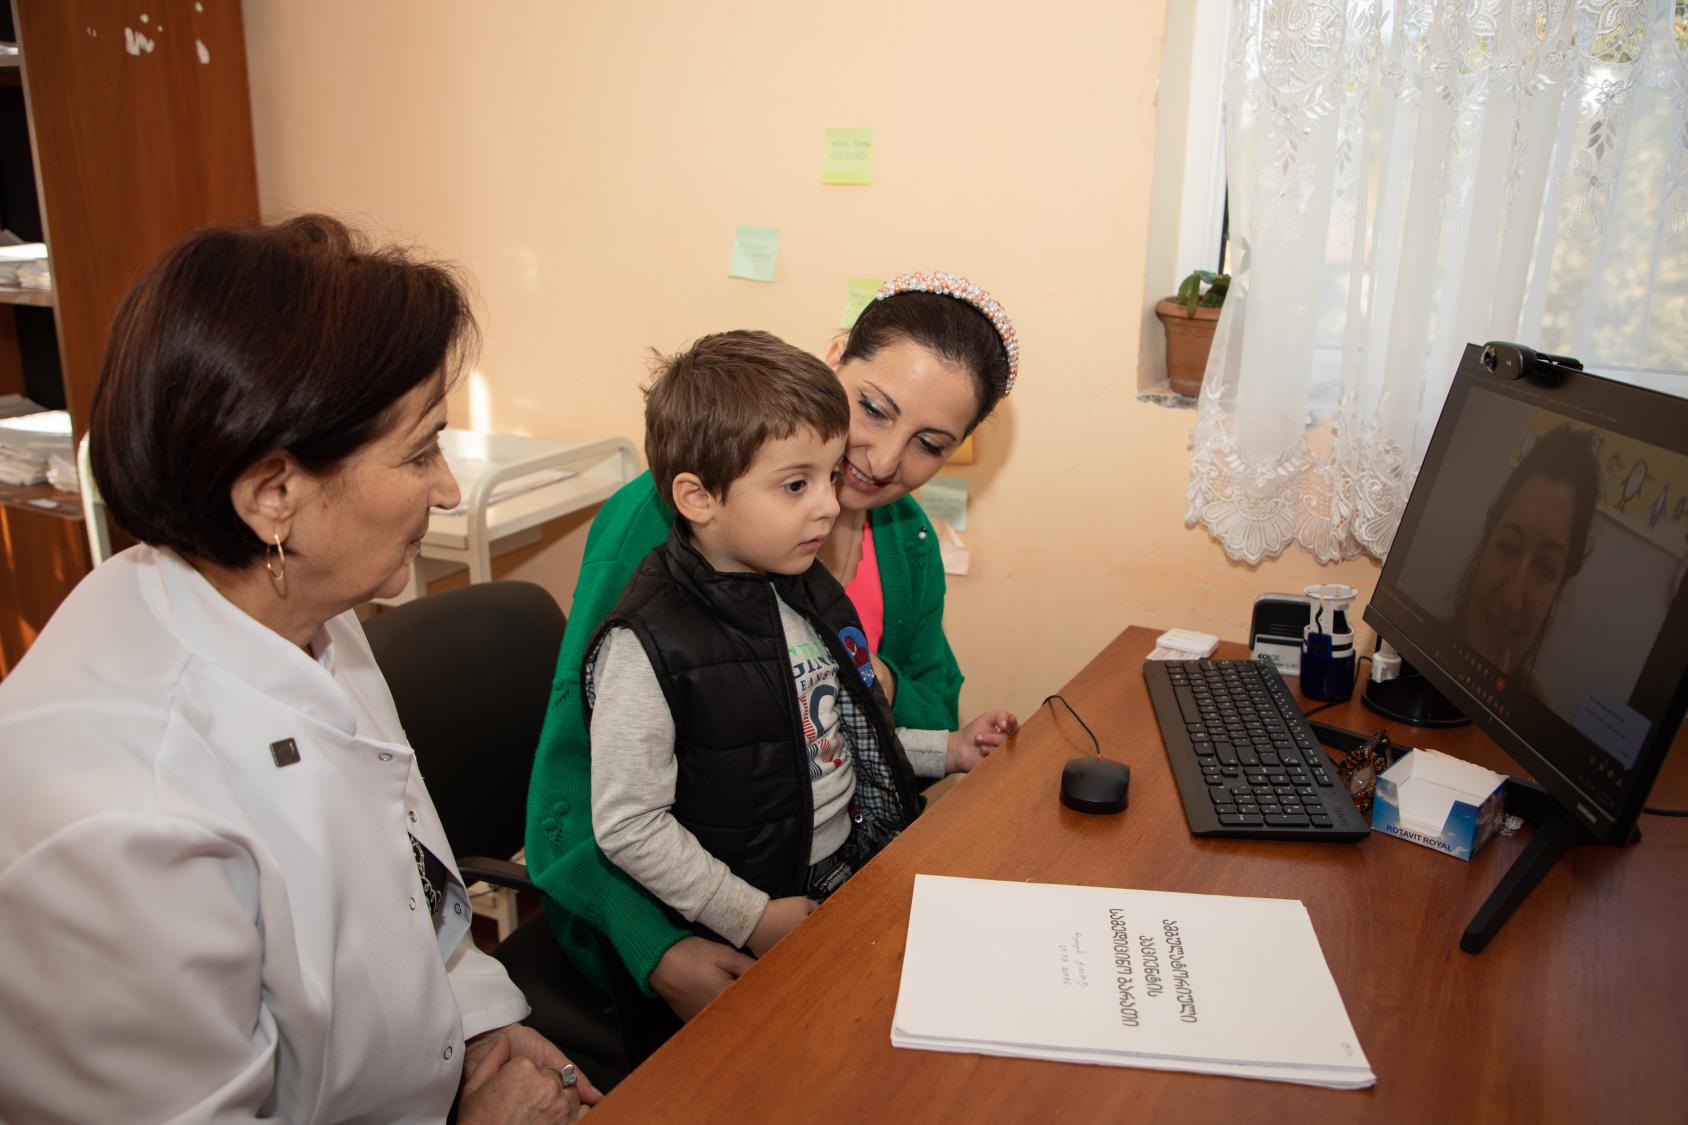 A little boy sits on the lap of a woman in a green dress, next to another woman in white clothing. He is talking to a doctor in a computer screen on a brown desk.